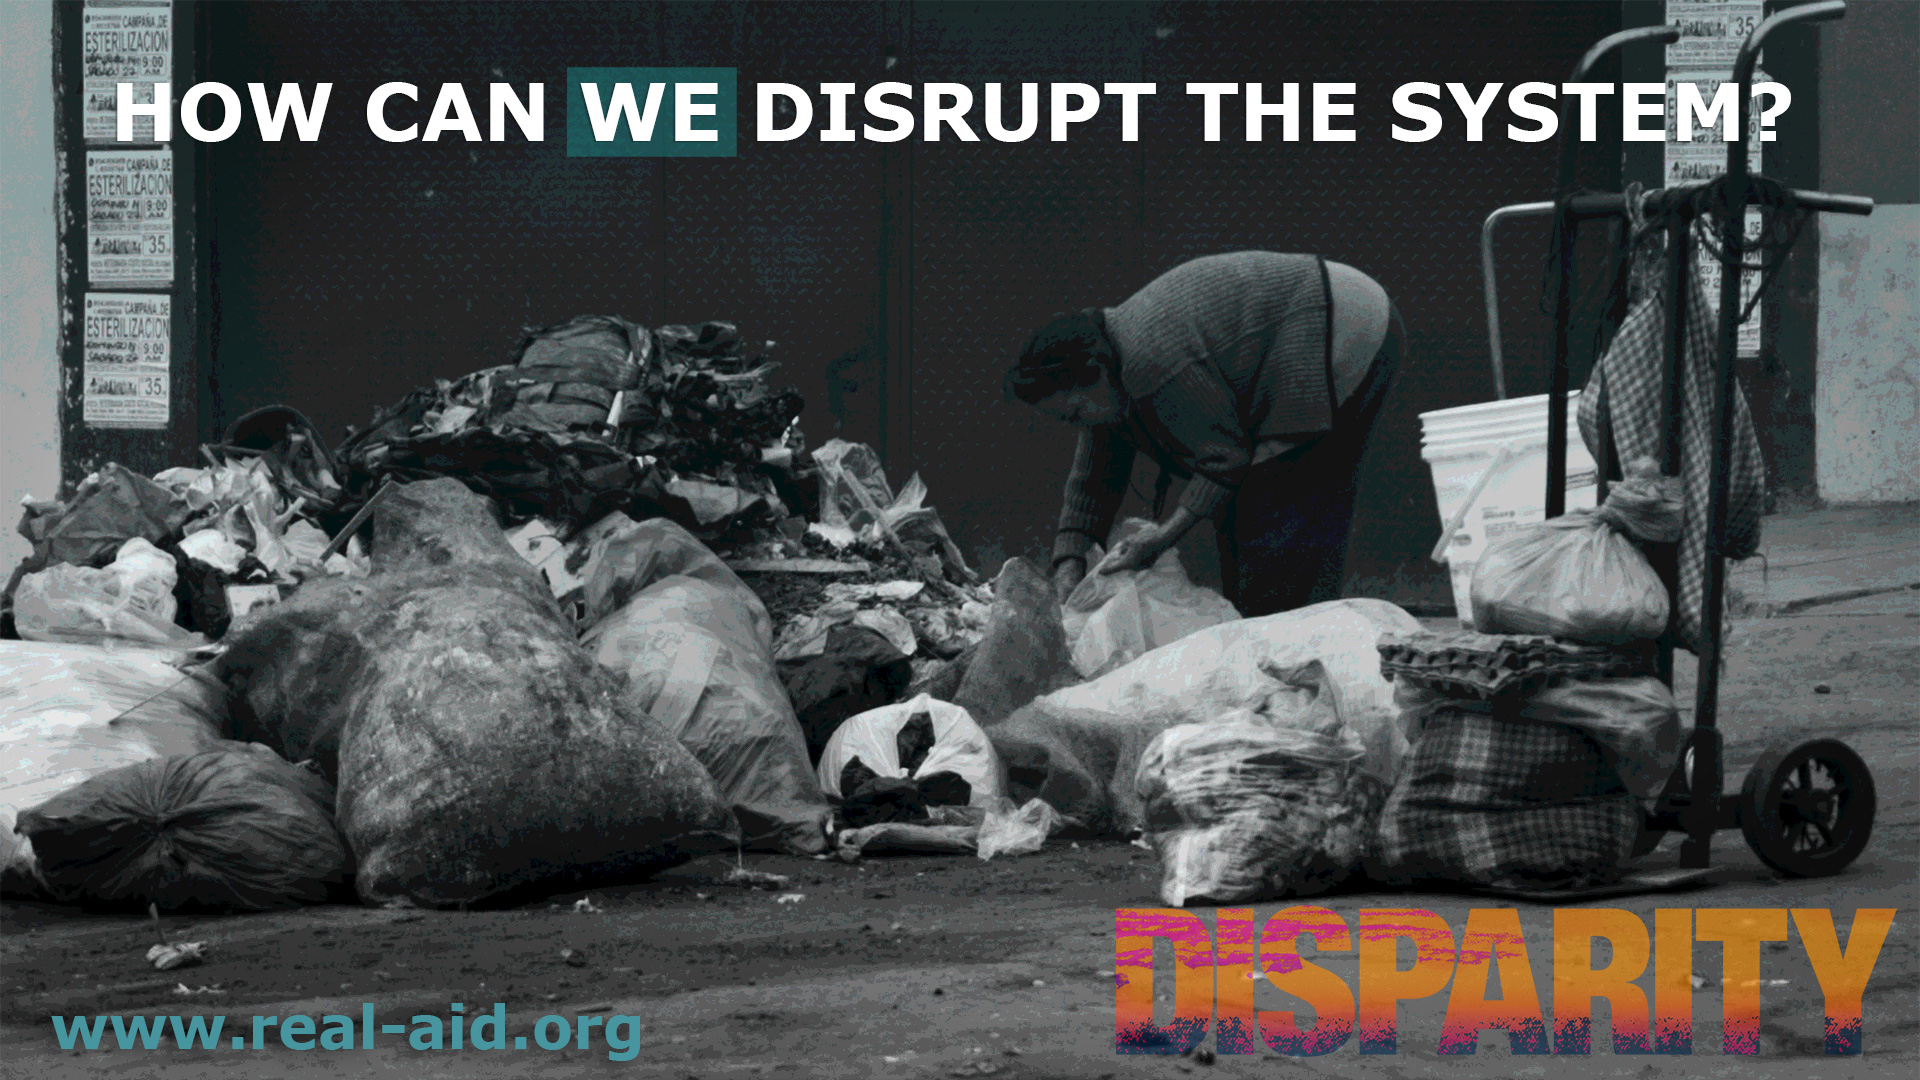 Disparity Film Poster, How can we disrupt the system quote, person scavenging waste